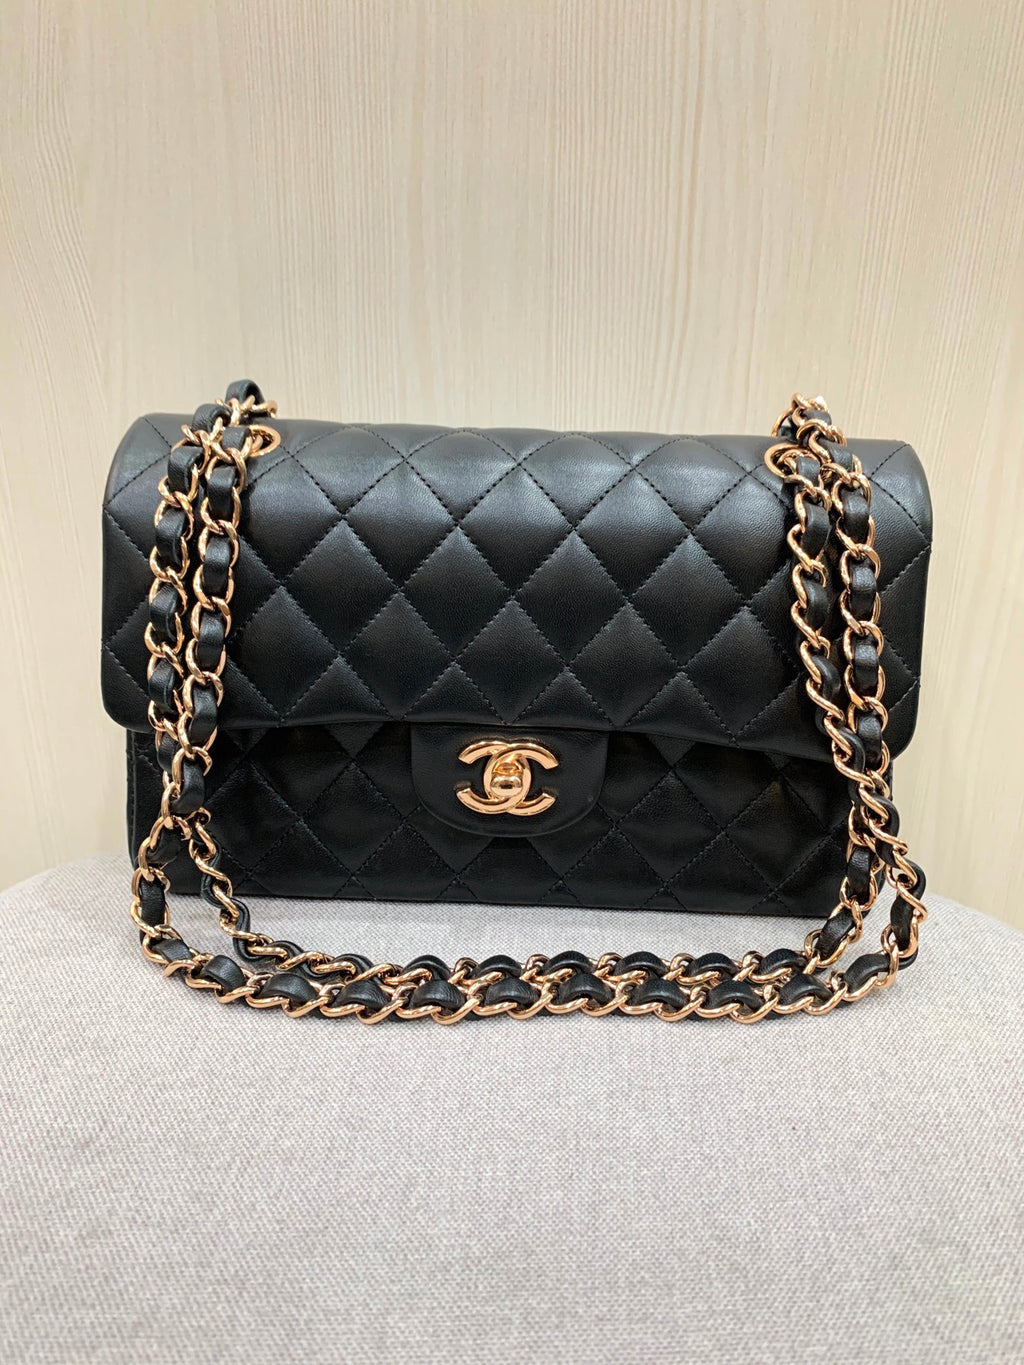 Chanel 9 Black Classic Double Flap Bag with Gold Hardware at